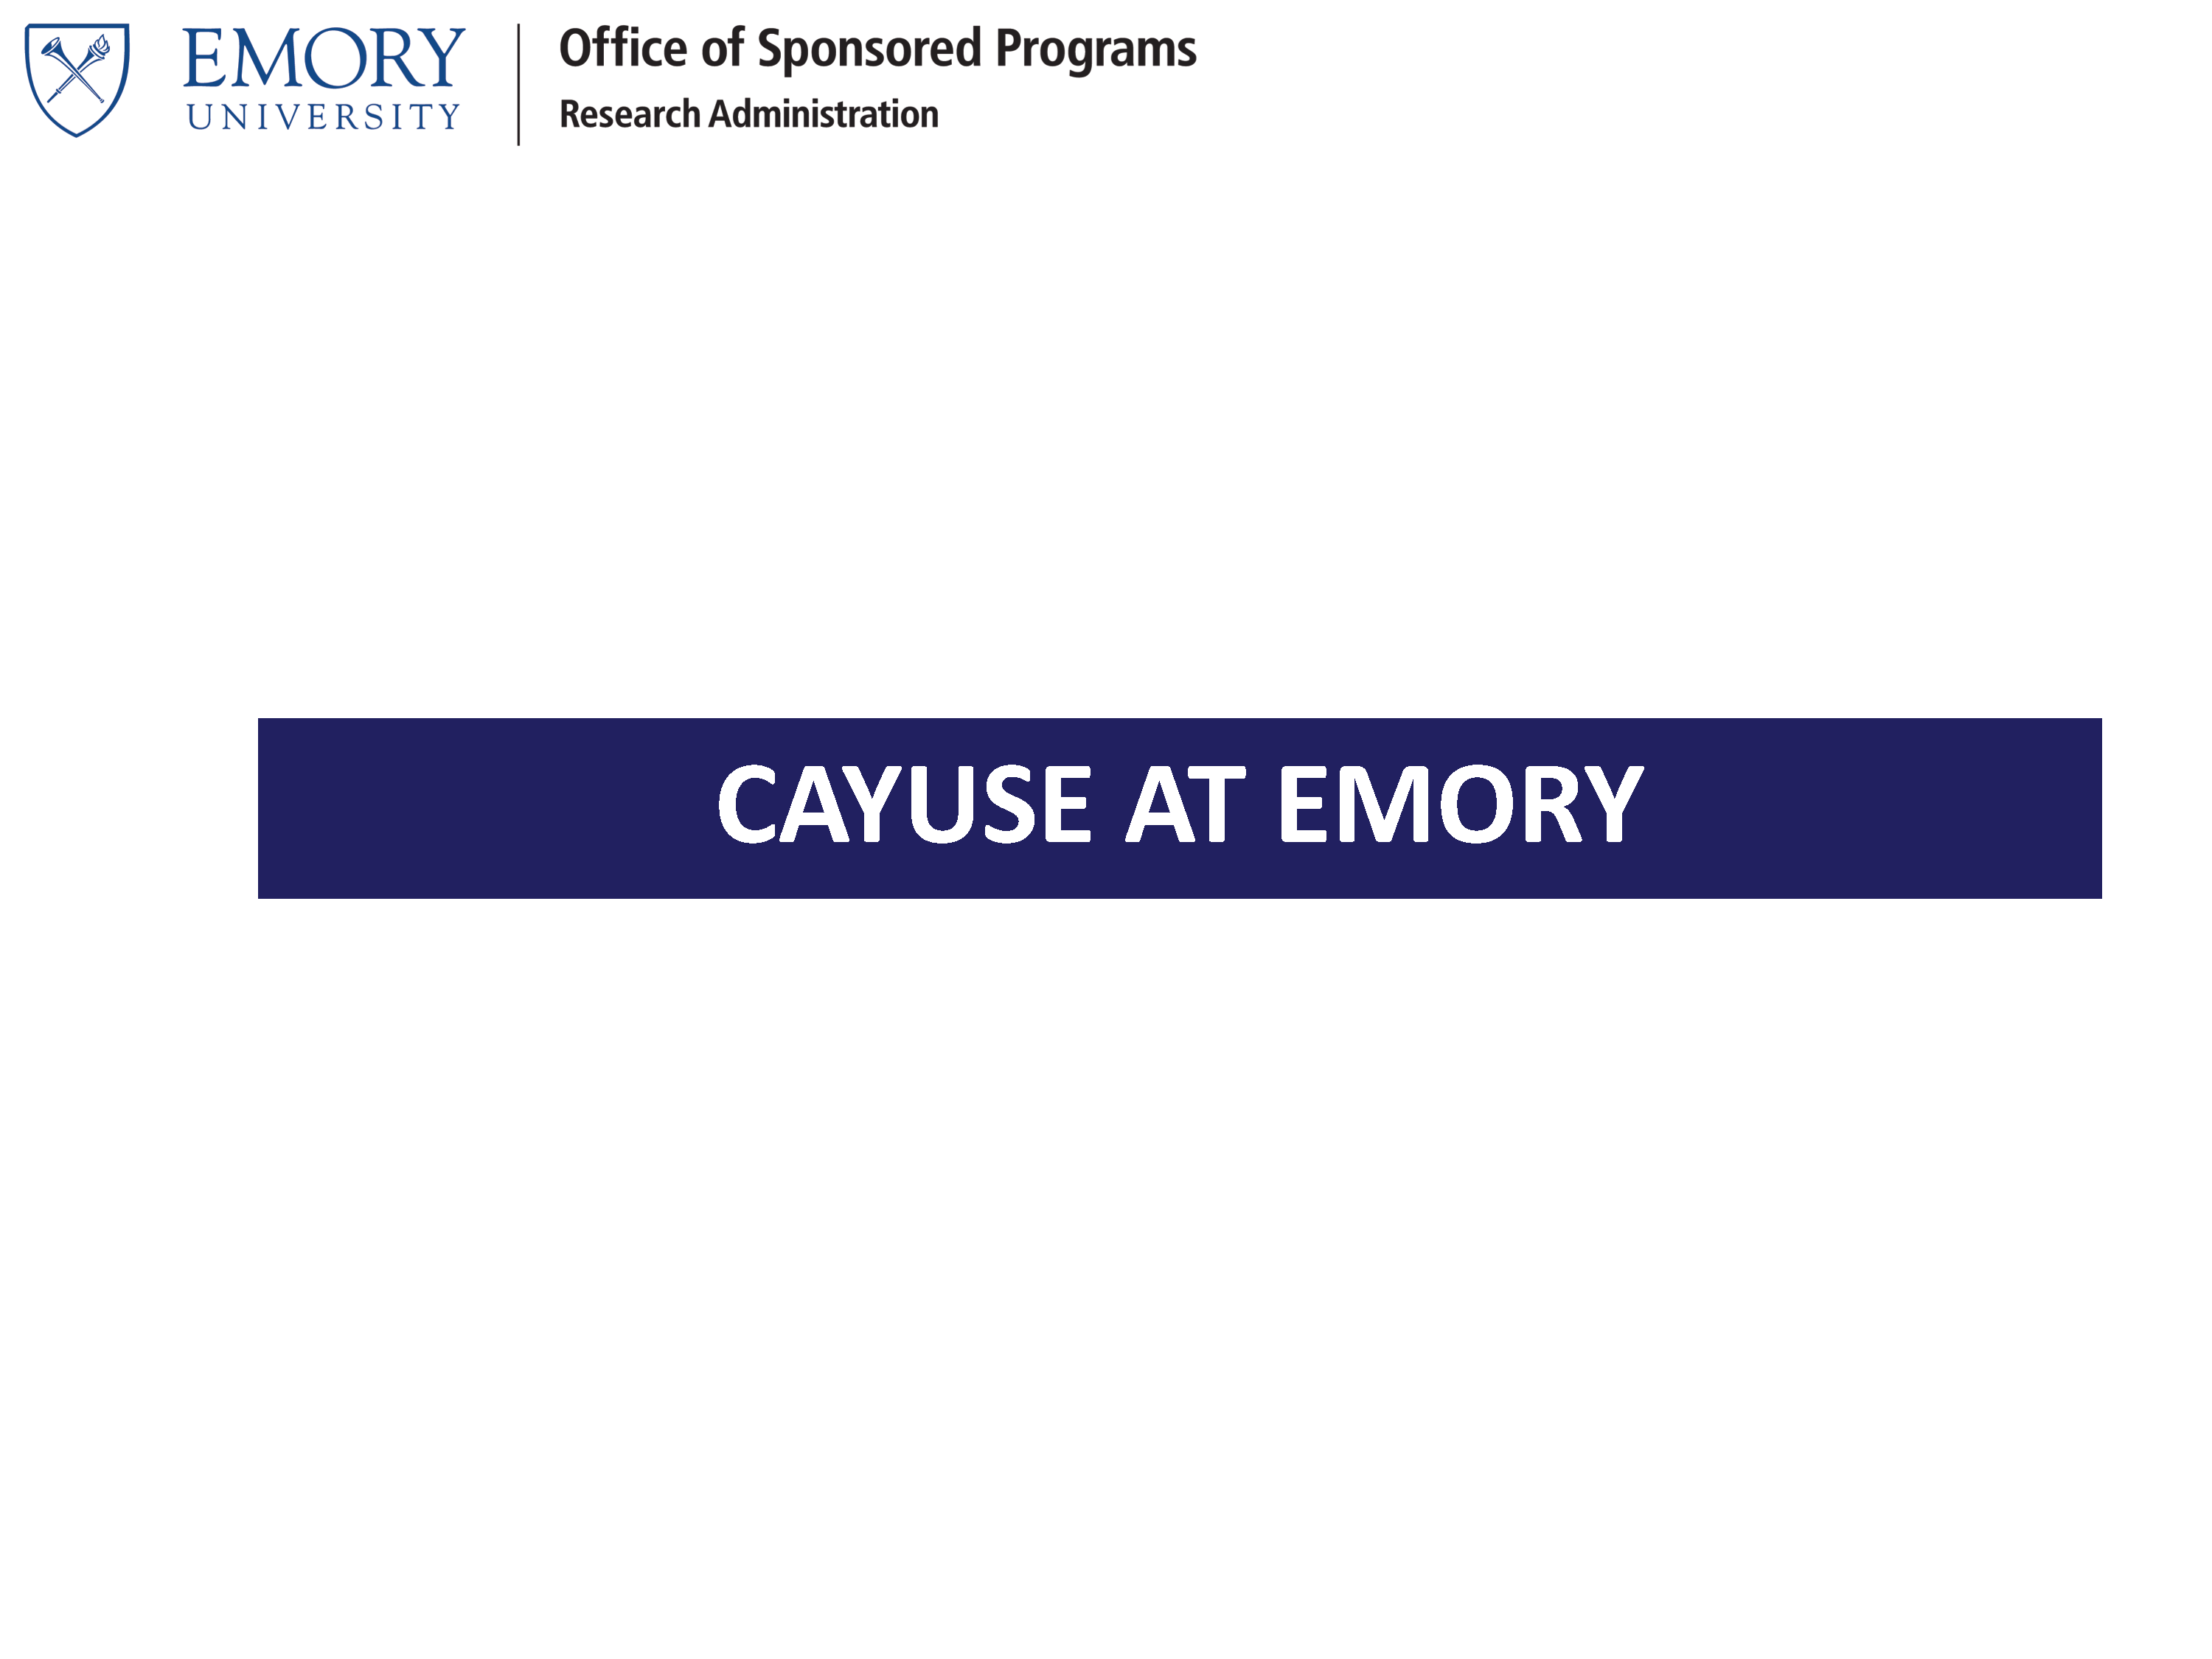 Cayuse at Emory